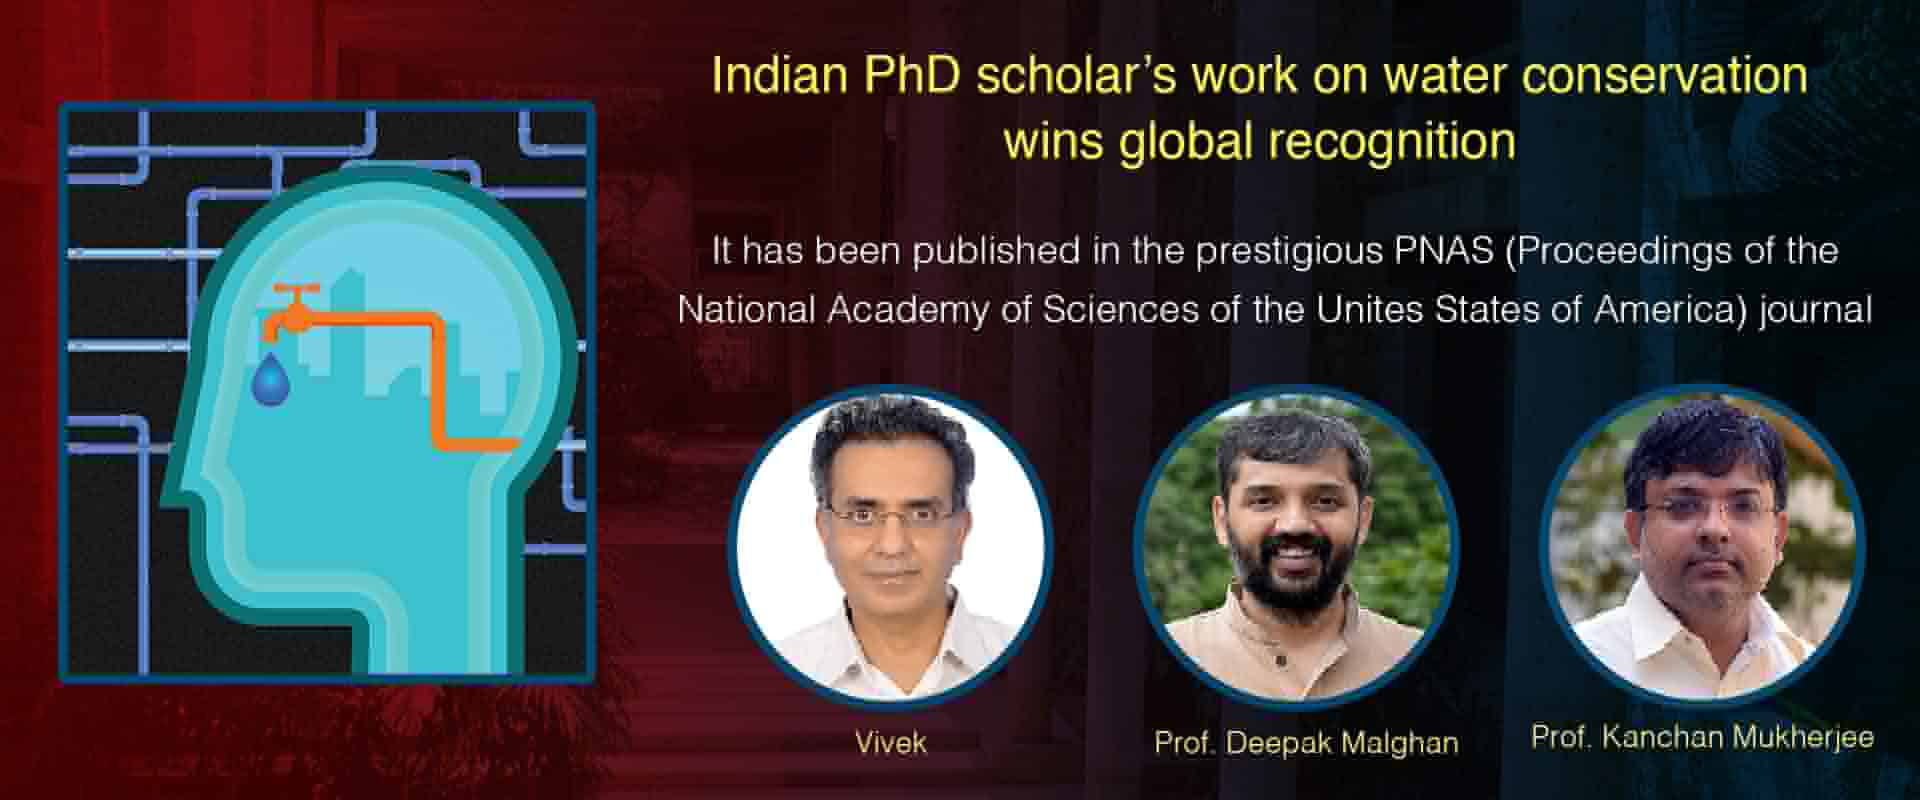 Indian PhD scholar’s work on water conservation wins global recognition